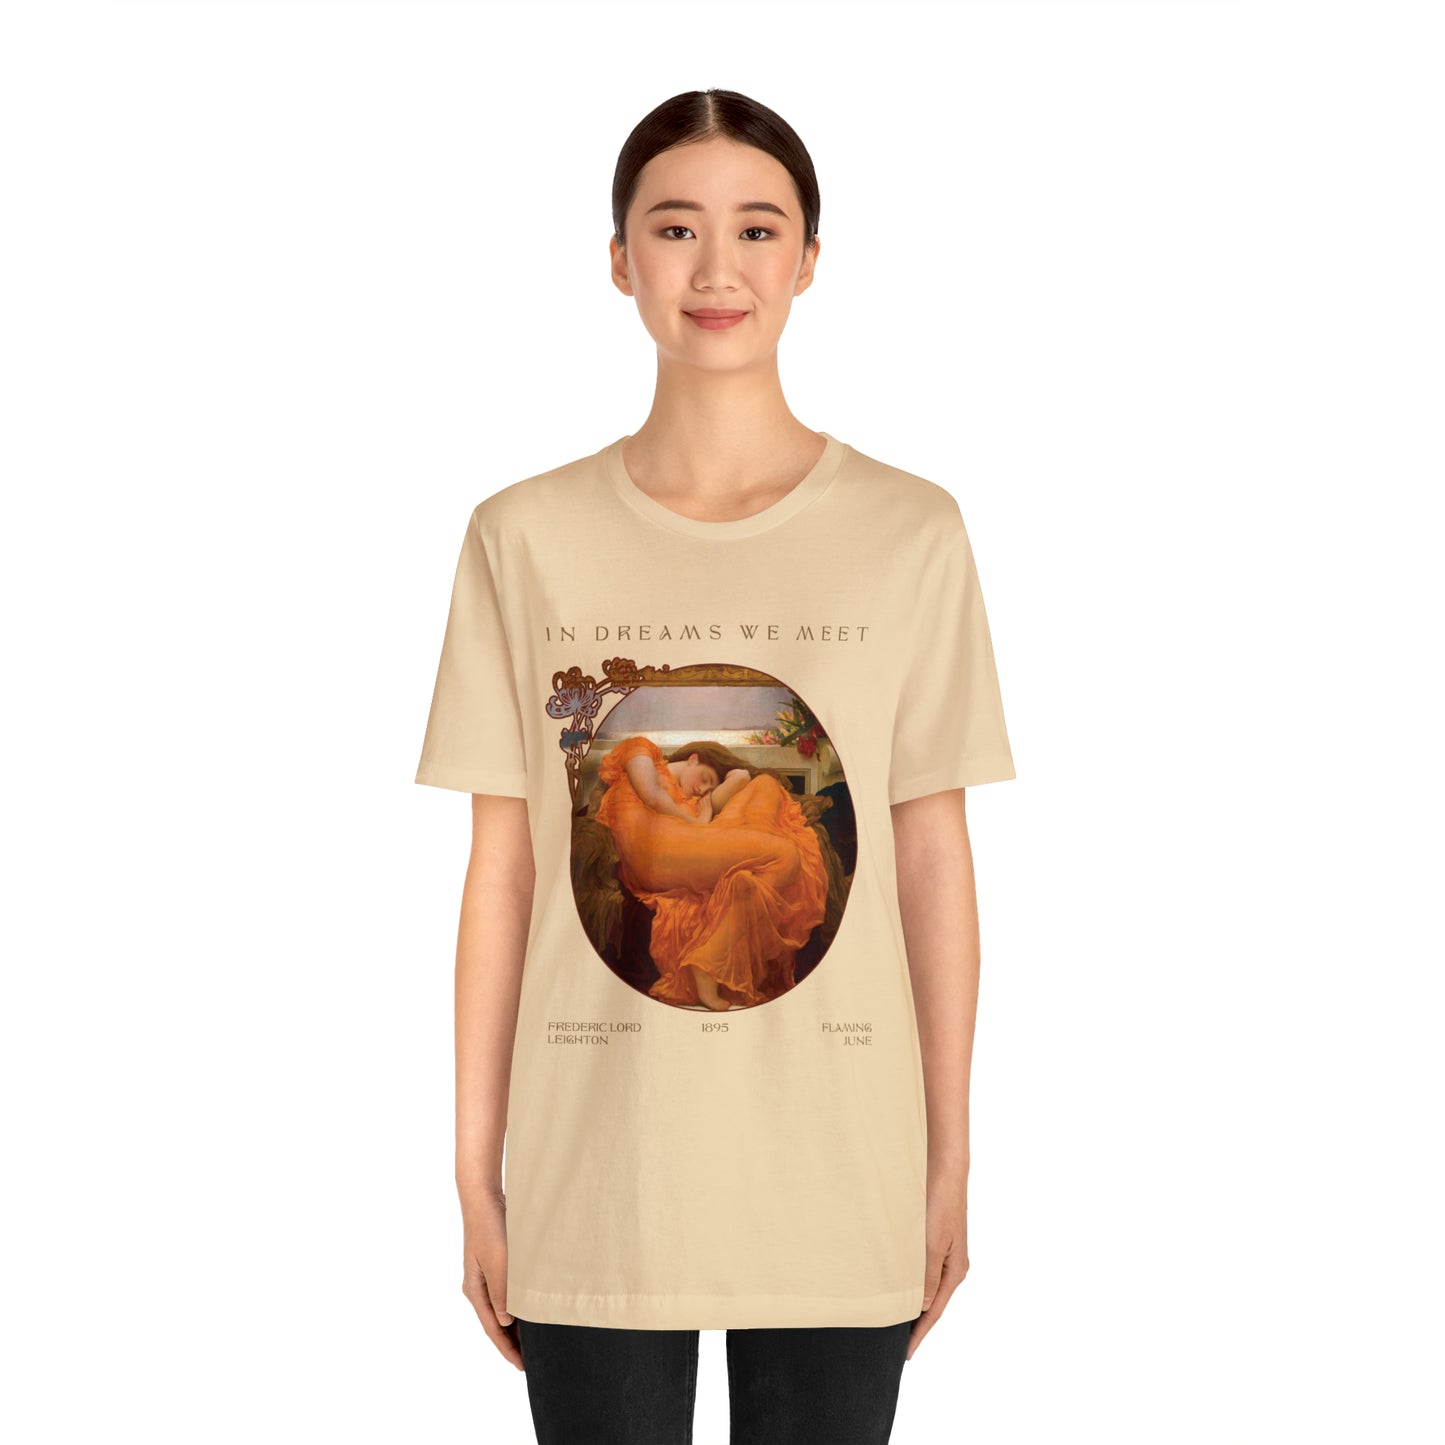 Exclusive Design 'Flaming June' by Fredric Leighton - Unisex Jersey Short Sleeve Tee